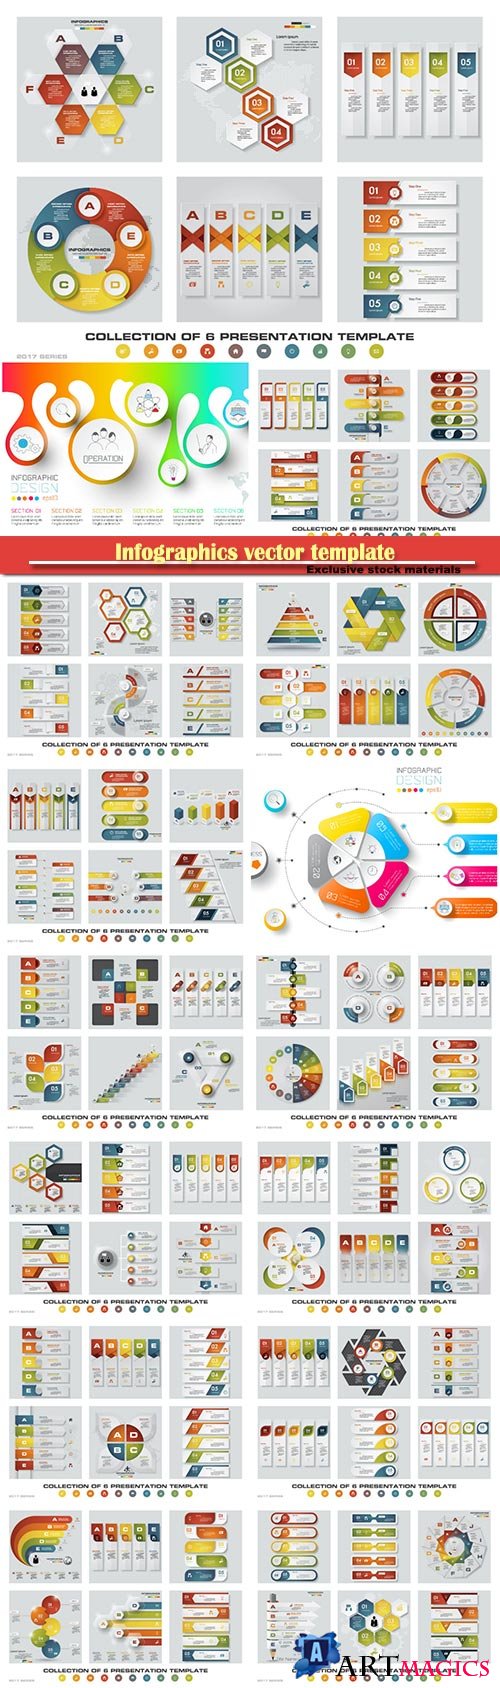 Infographics vector template for business presentations or information banner # 39